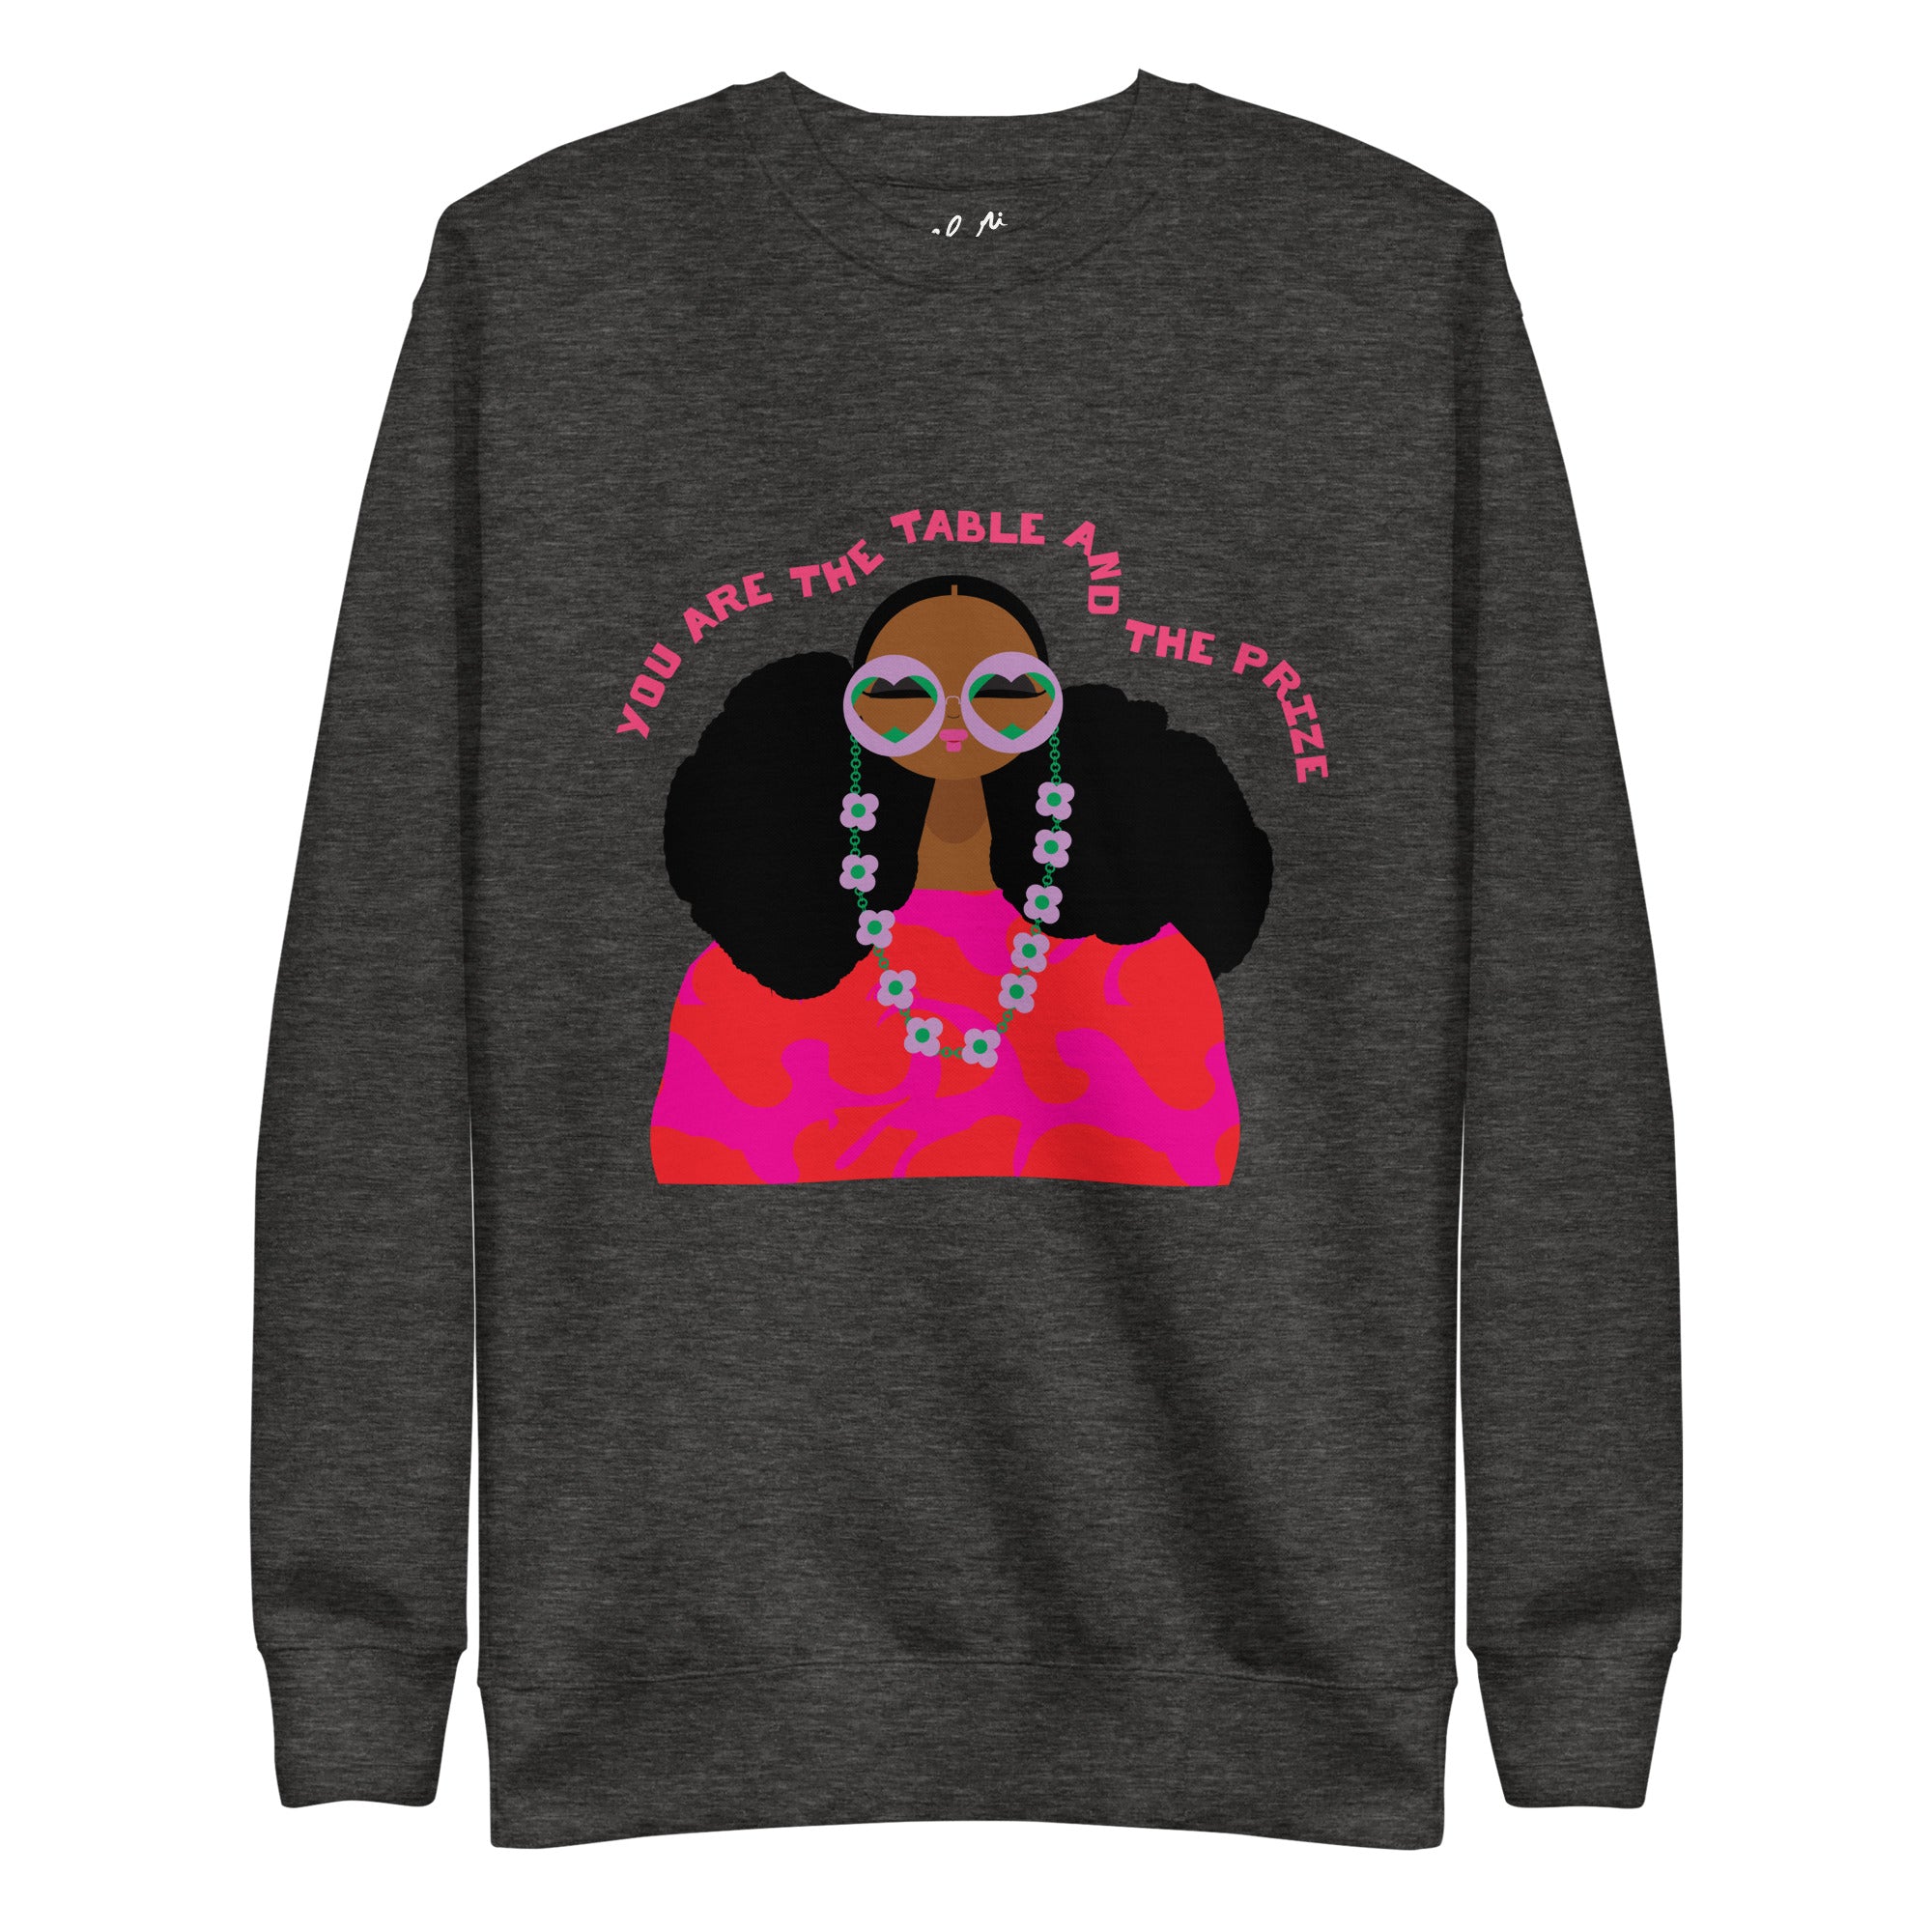 You are the table &amp; the prize  Sweatshirt